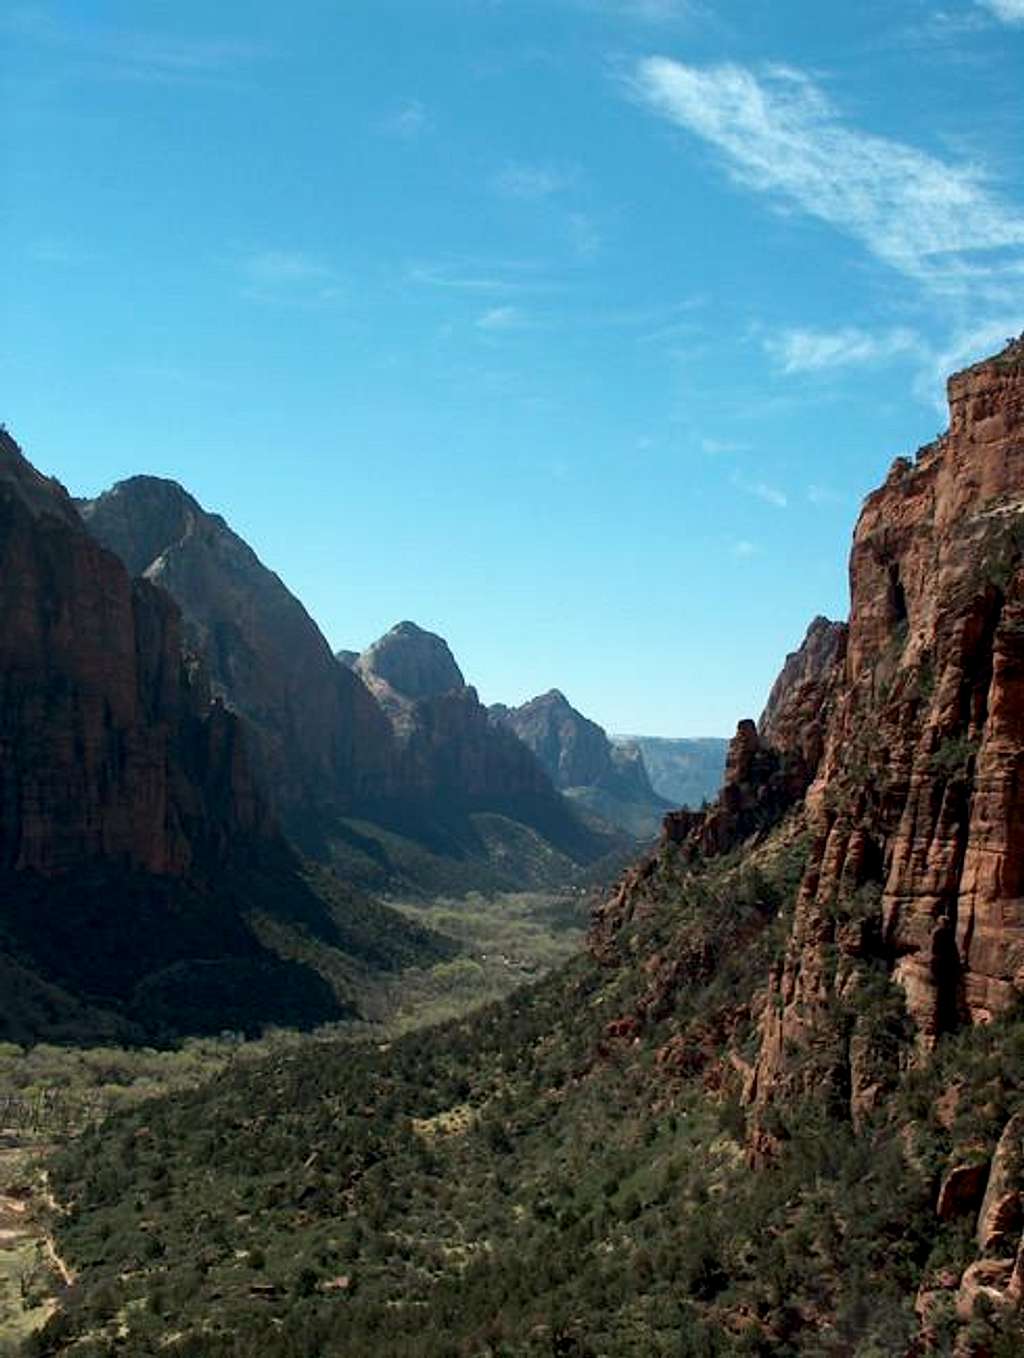 Views out West of Zion Canyon...